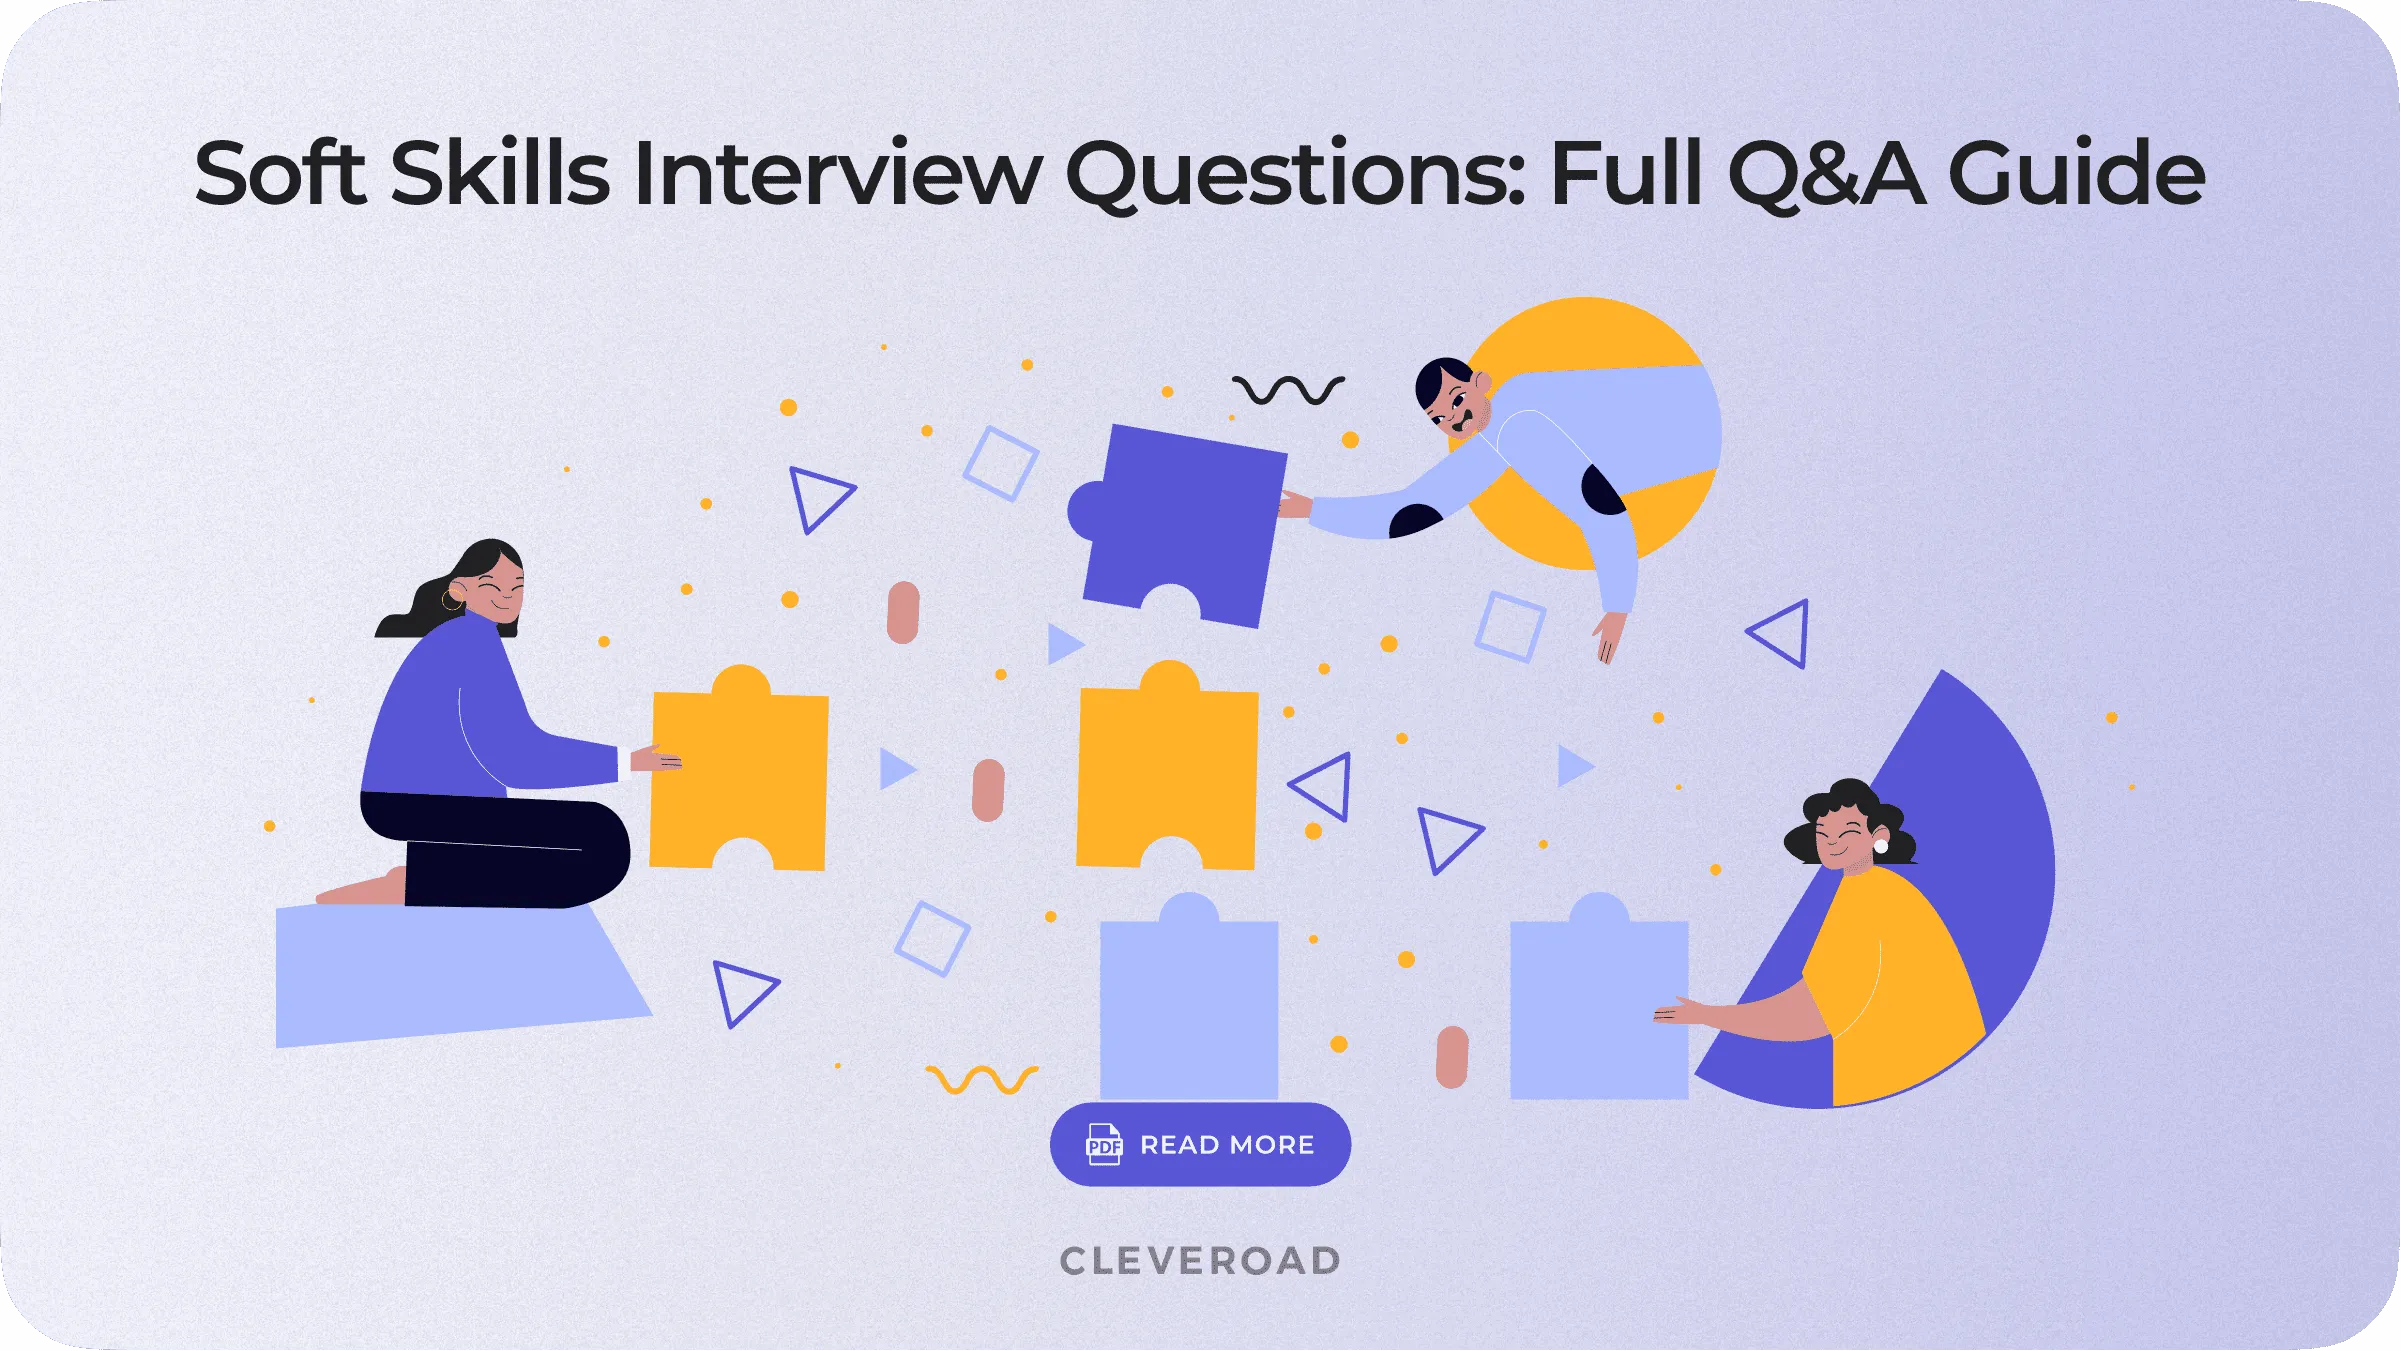 Front-end developer interview questions to test soft skills